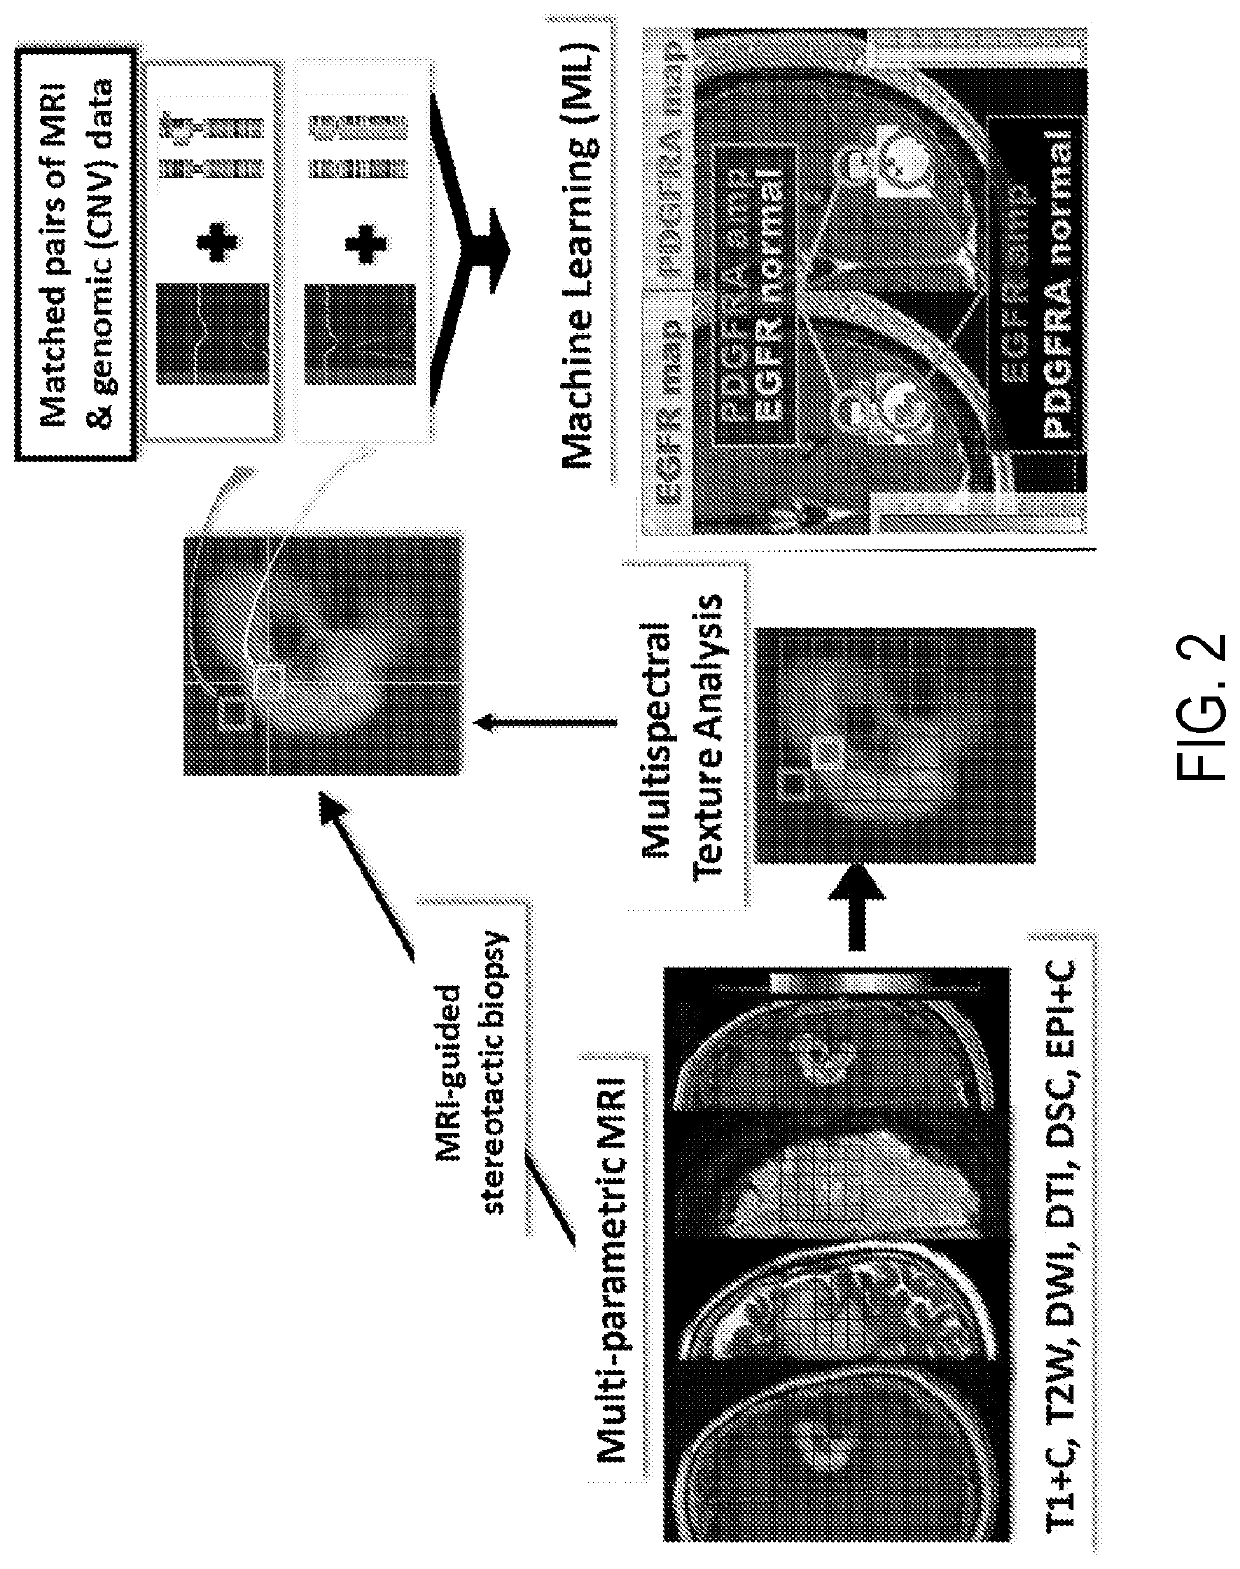 Systems and Methods for Quantifying Multiscale Competitive Landscapes of Clonal Diversity in Glioblastoma